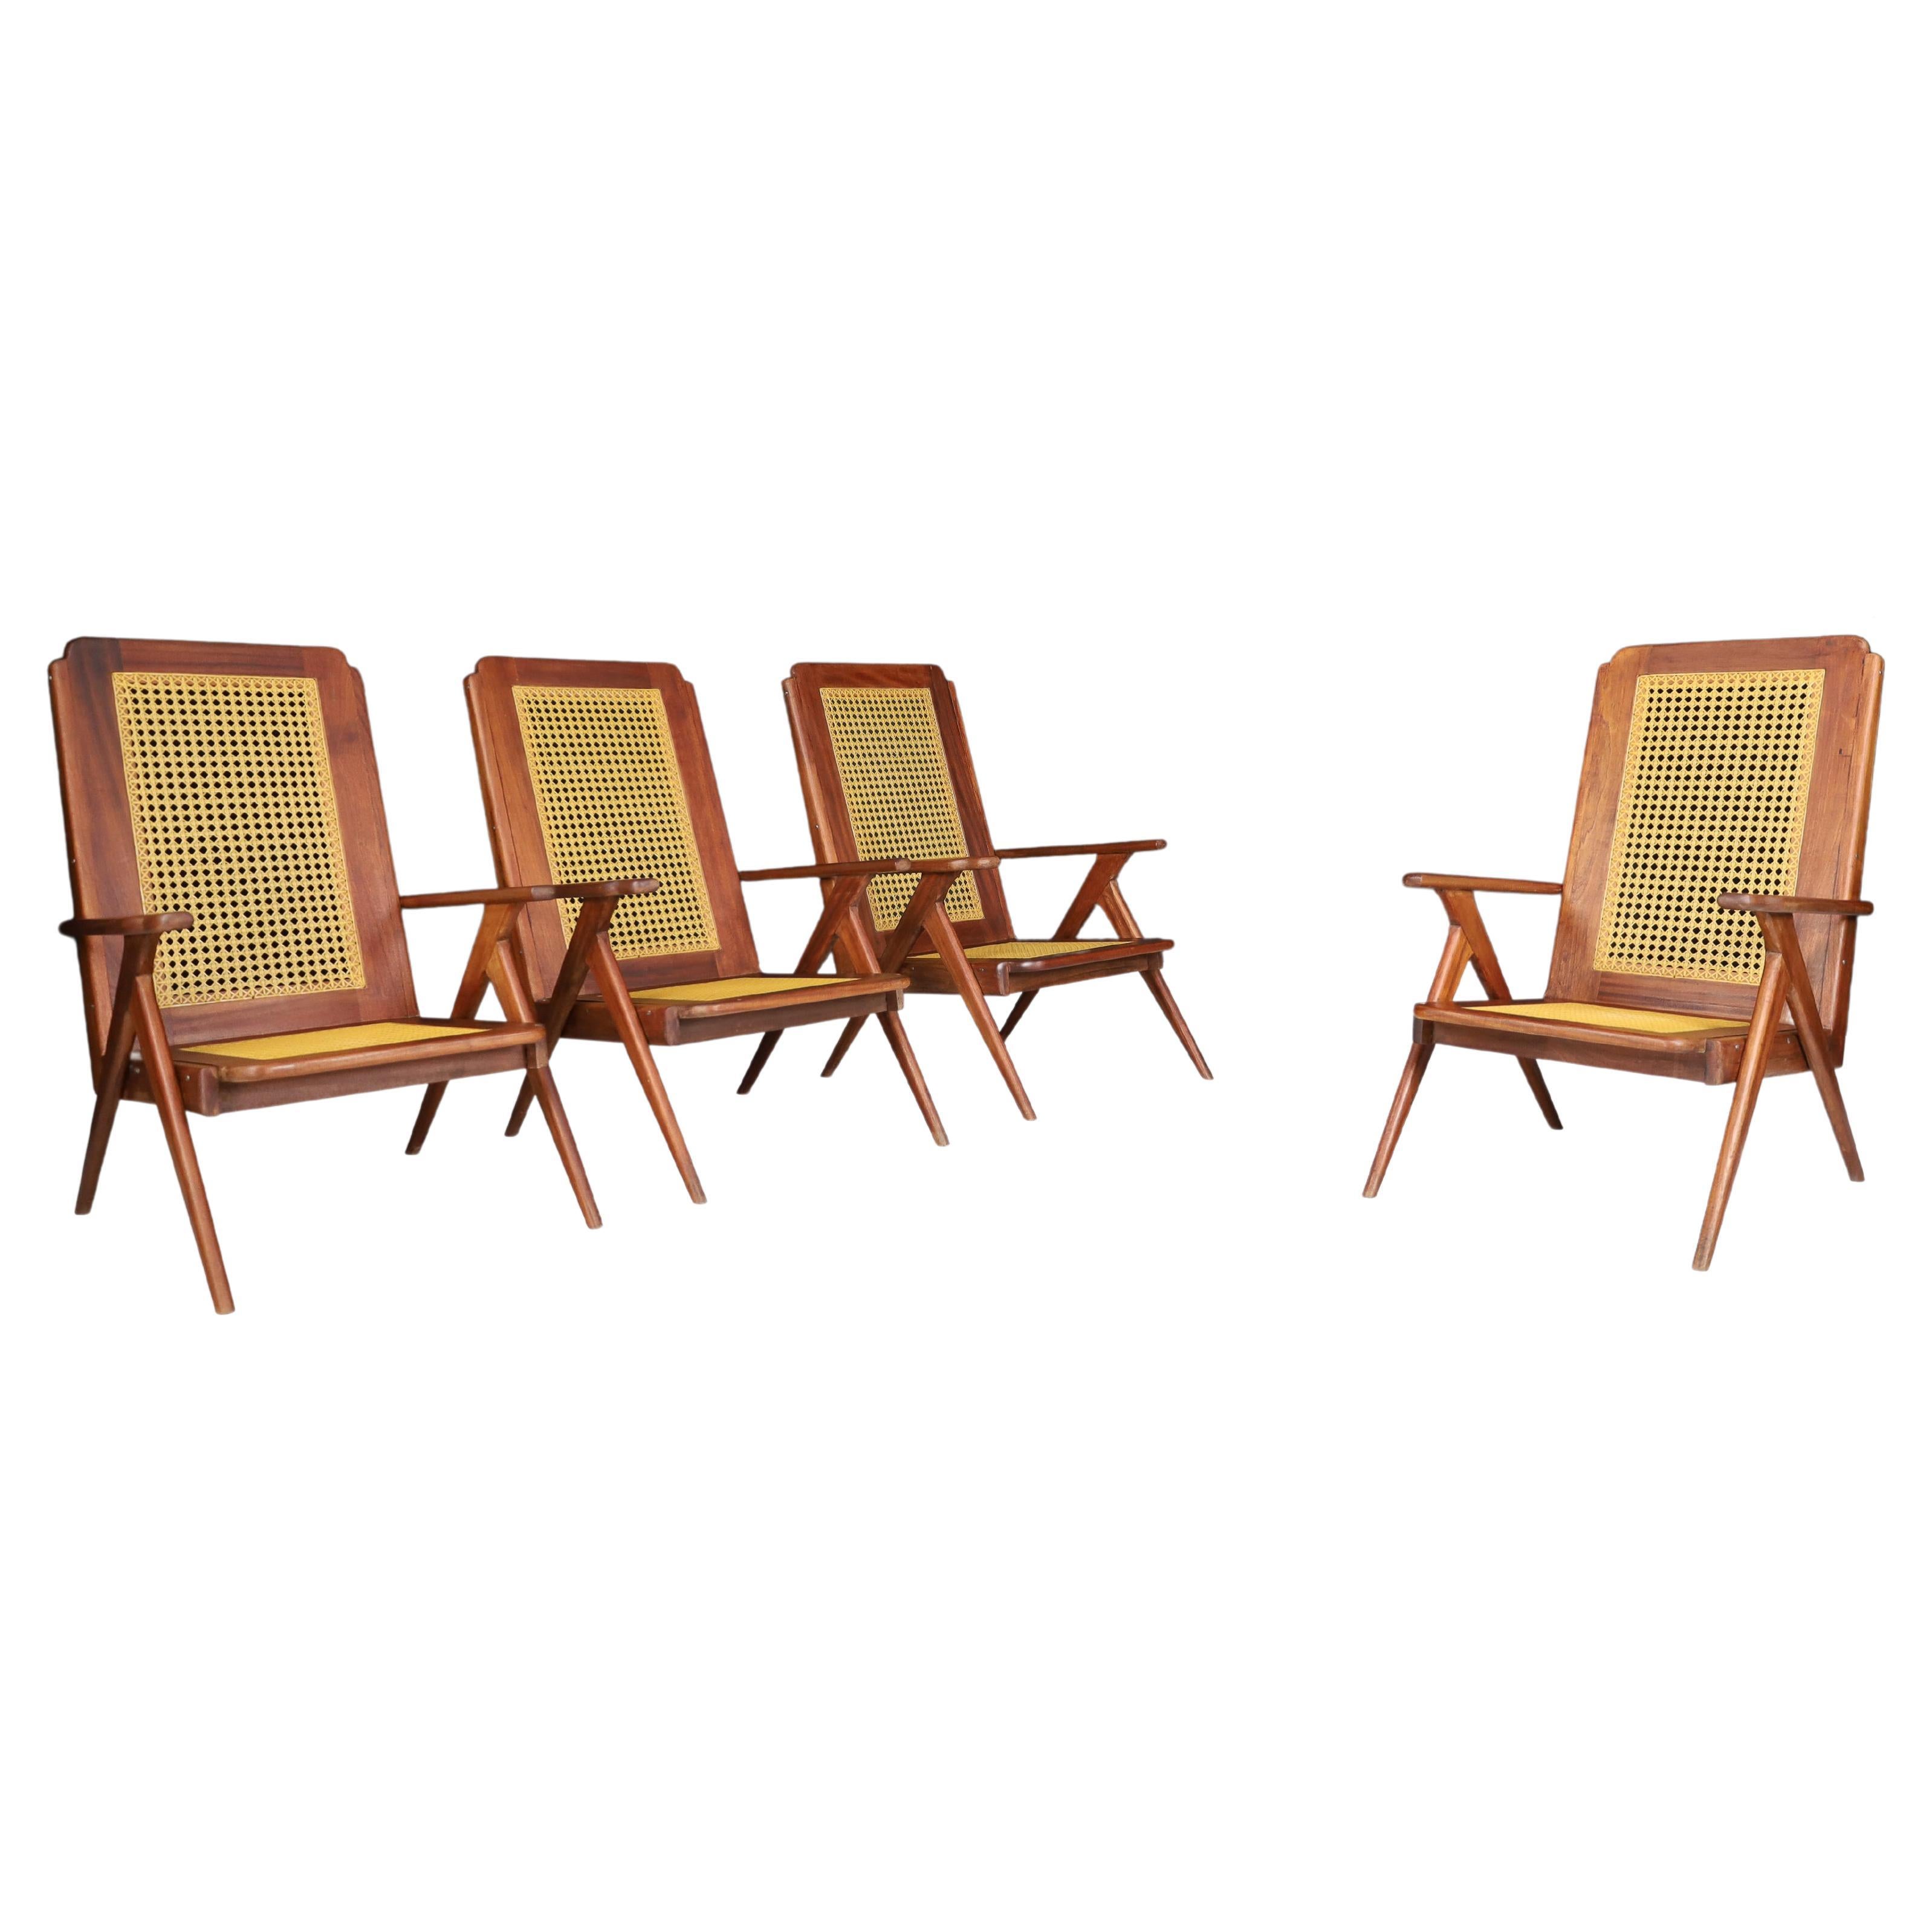 Lounge Chairs with Mahogany structure and Webbing, France 1950s For Sale